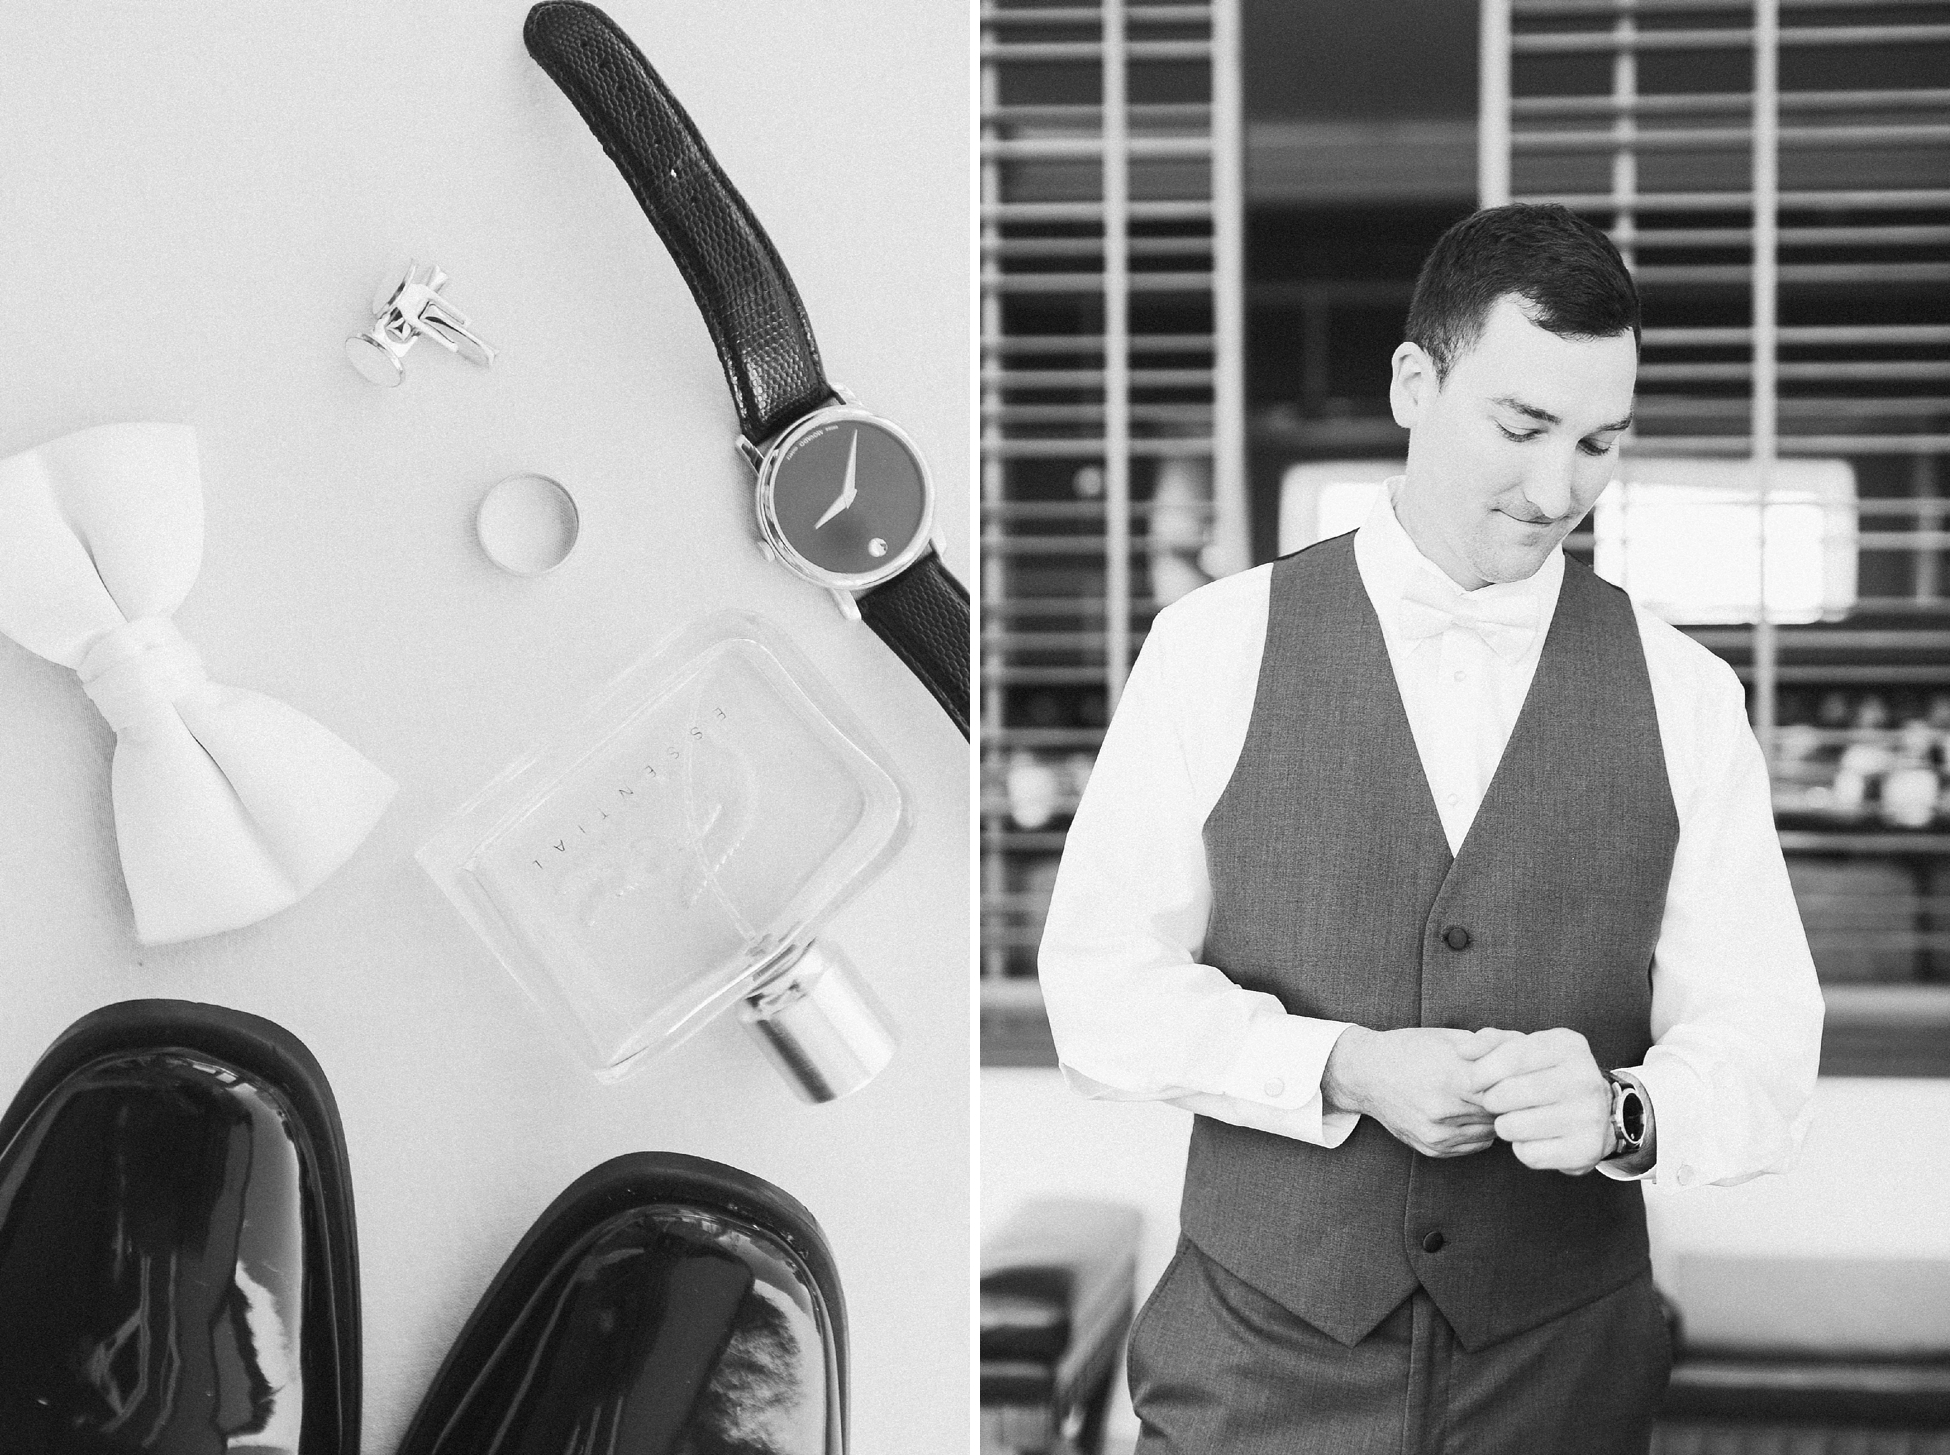 Tampa Wedding | © Ailyn La Torre Photography 2018